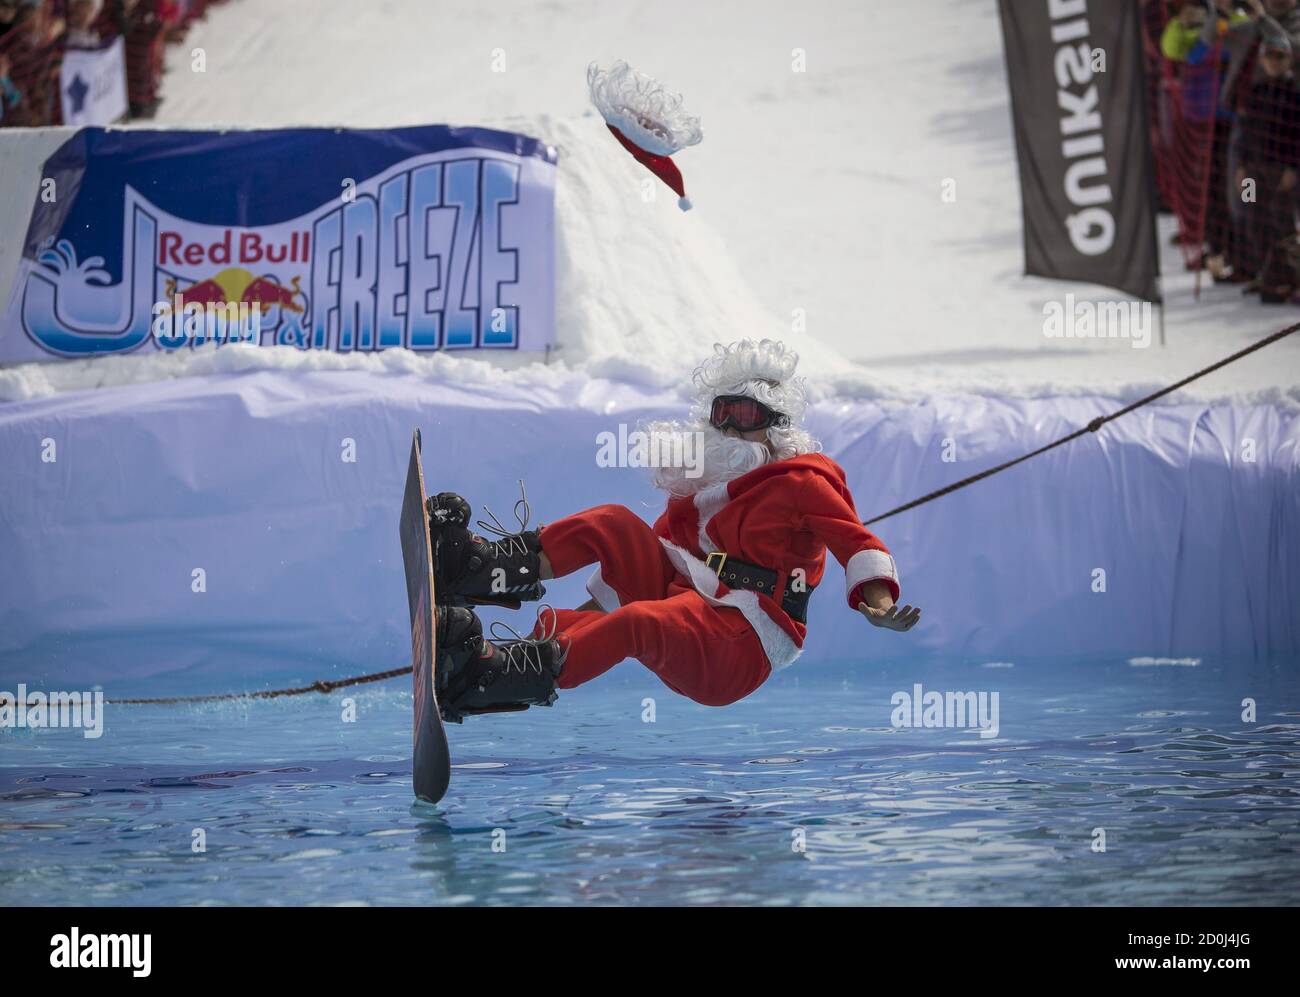 A snowboarder dressed as Santa Claus performs during the Red Bull Jump and  Freeze competition at ski resort Shimbulak outside Almaty March 22, 2015.  Participants wearing festive costumes perform tricks before getting